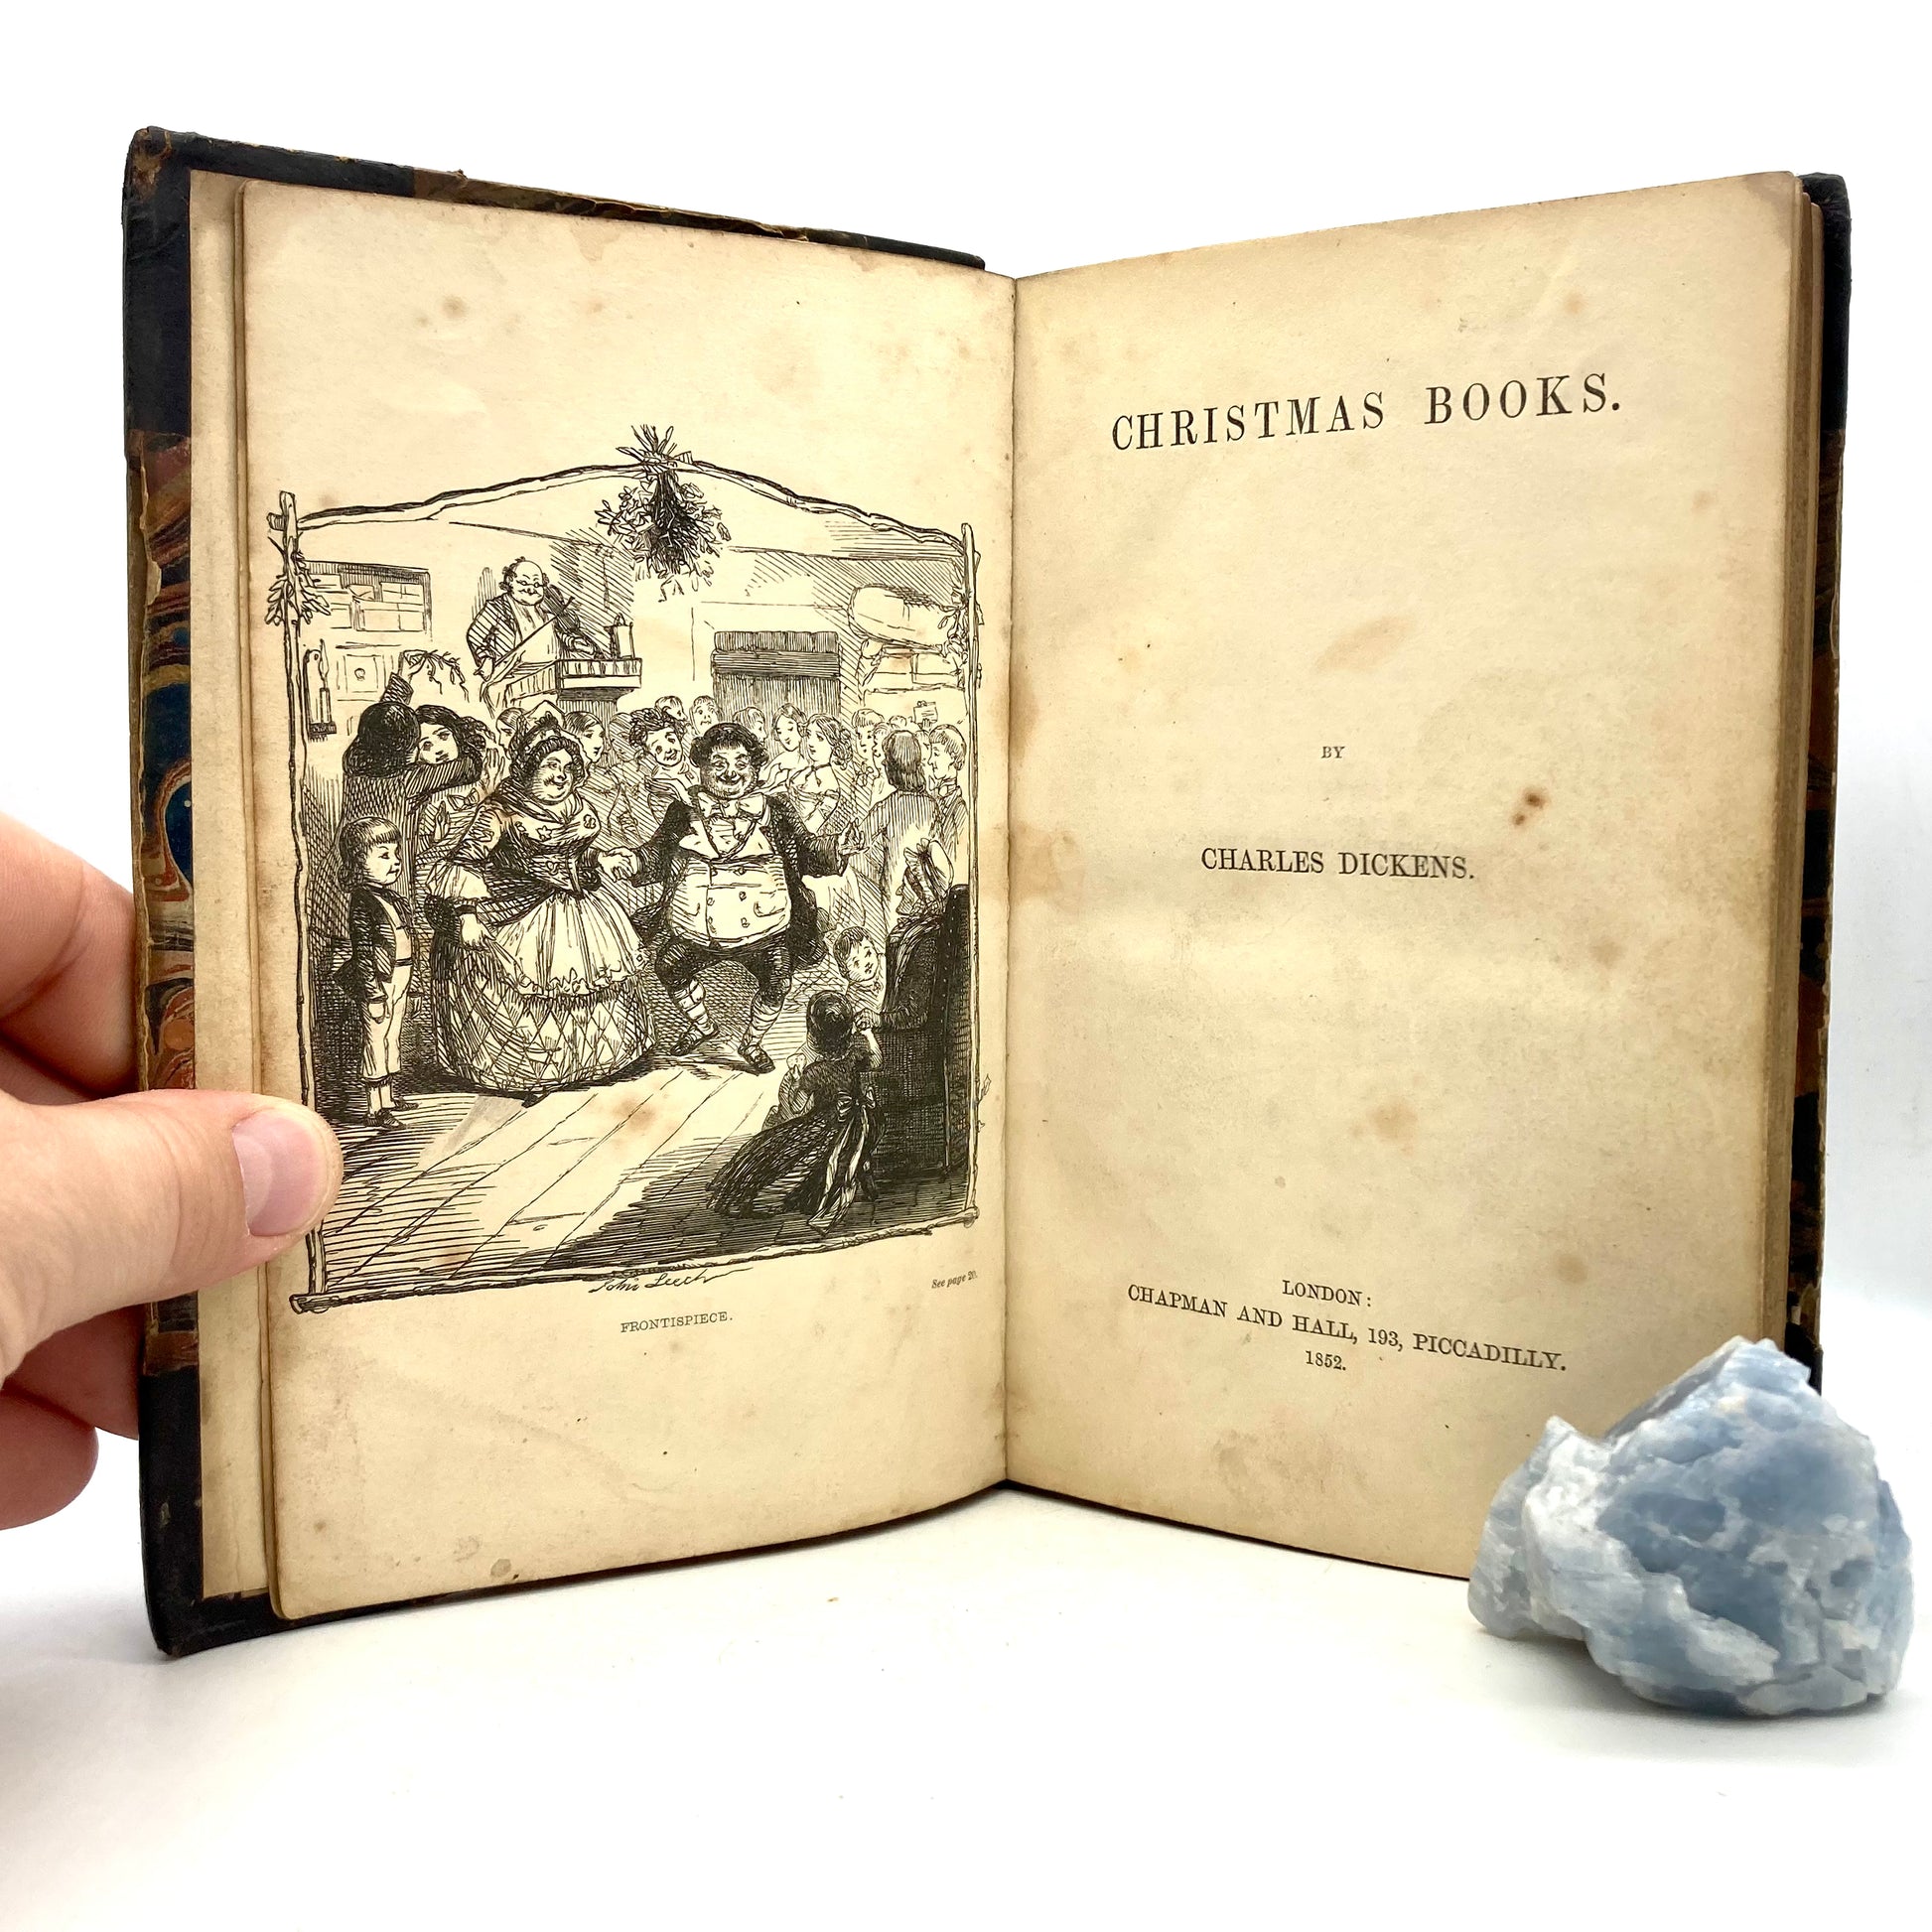 DICKENS, Charles "Christmas Books" [Chapman & Hall, 1852] 1st Edition Thus - Buzz Bookstore